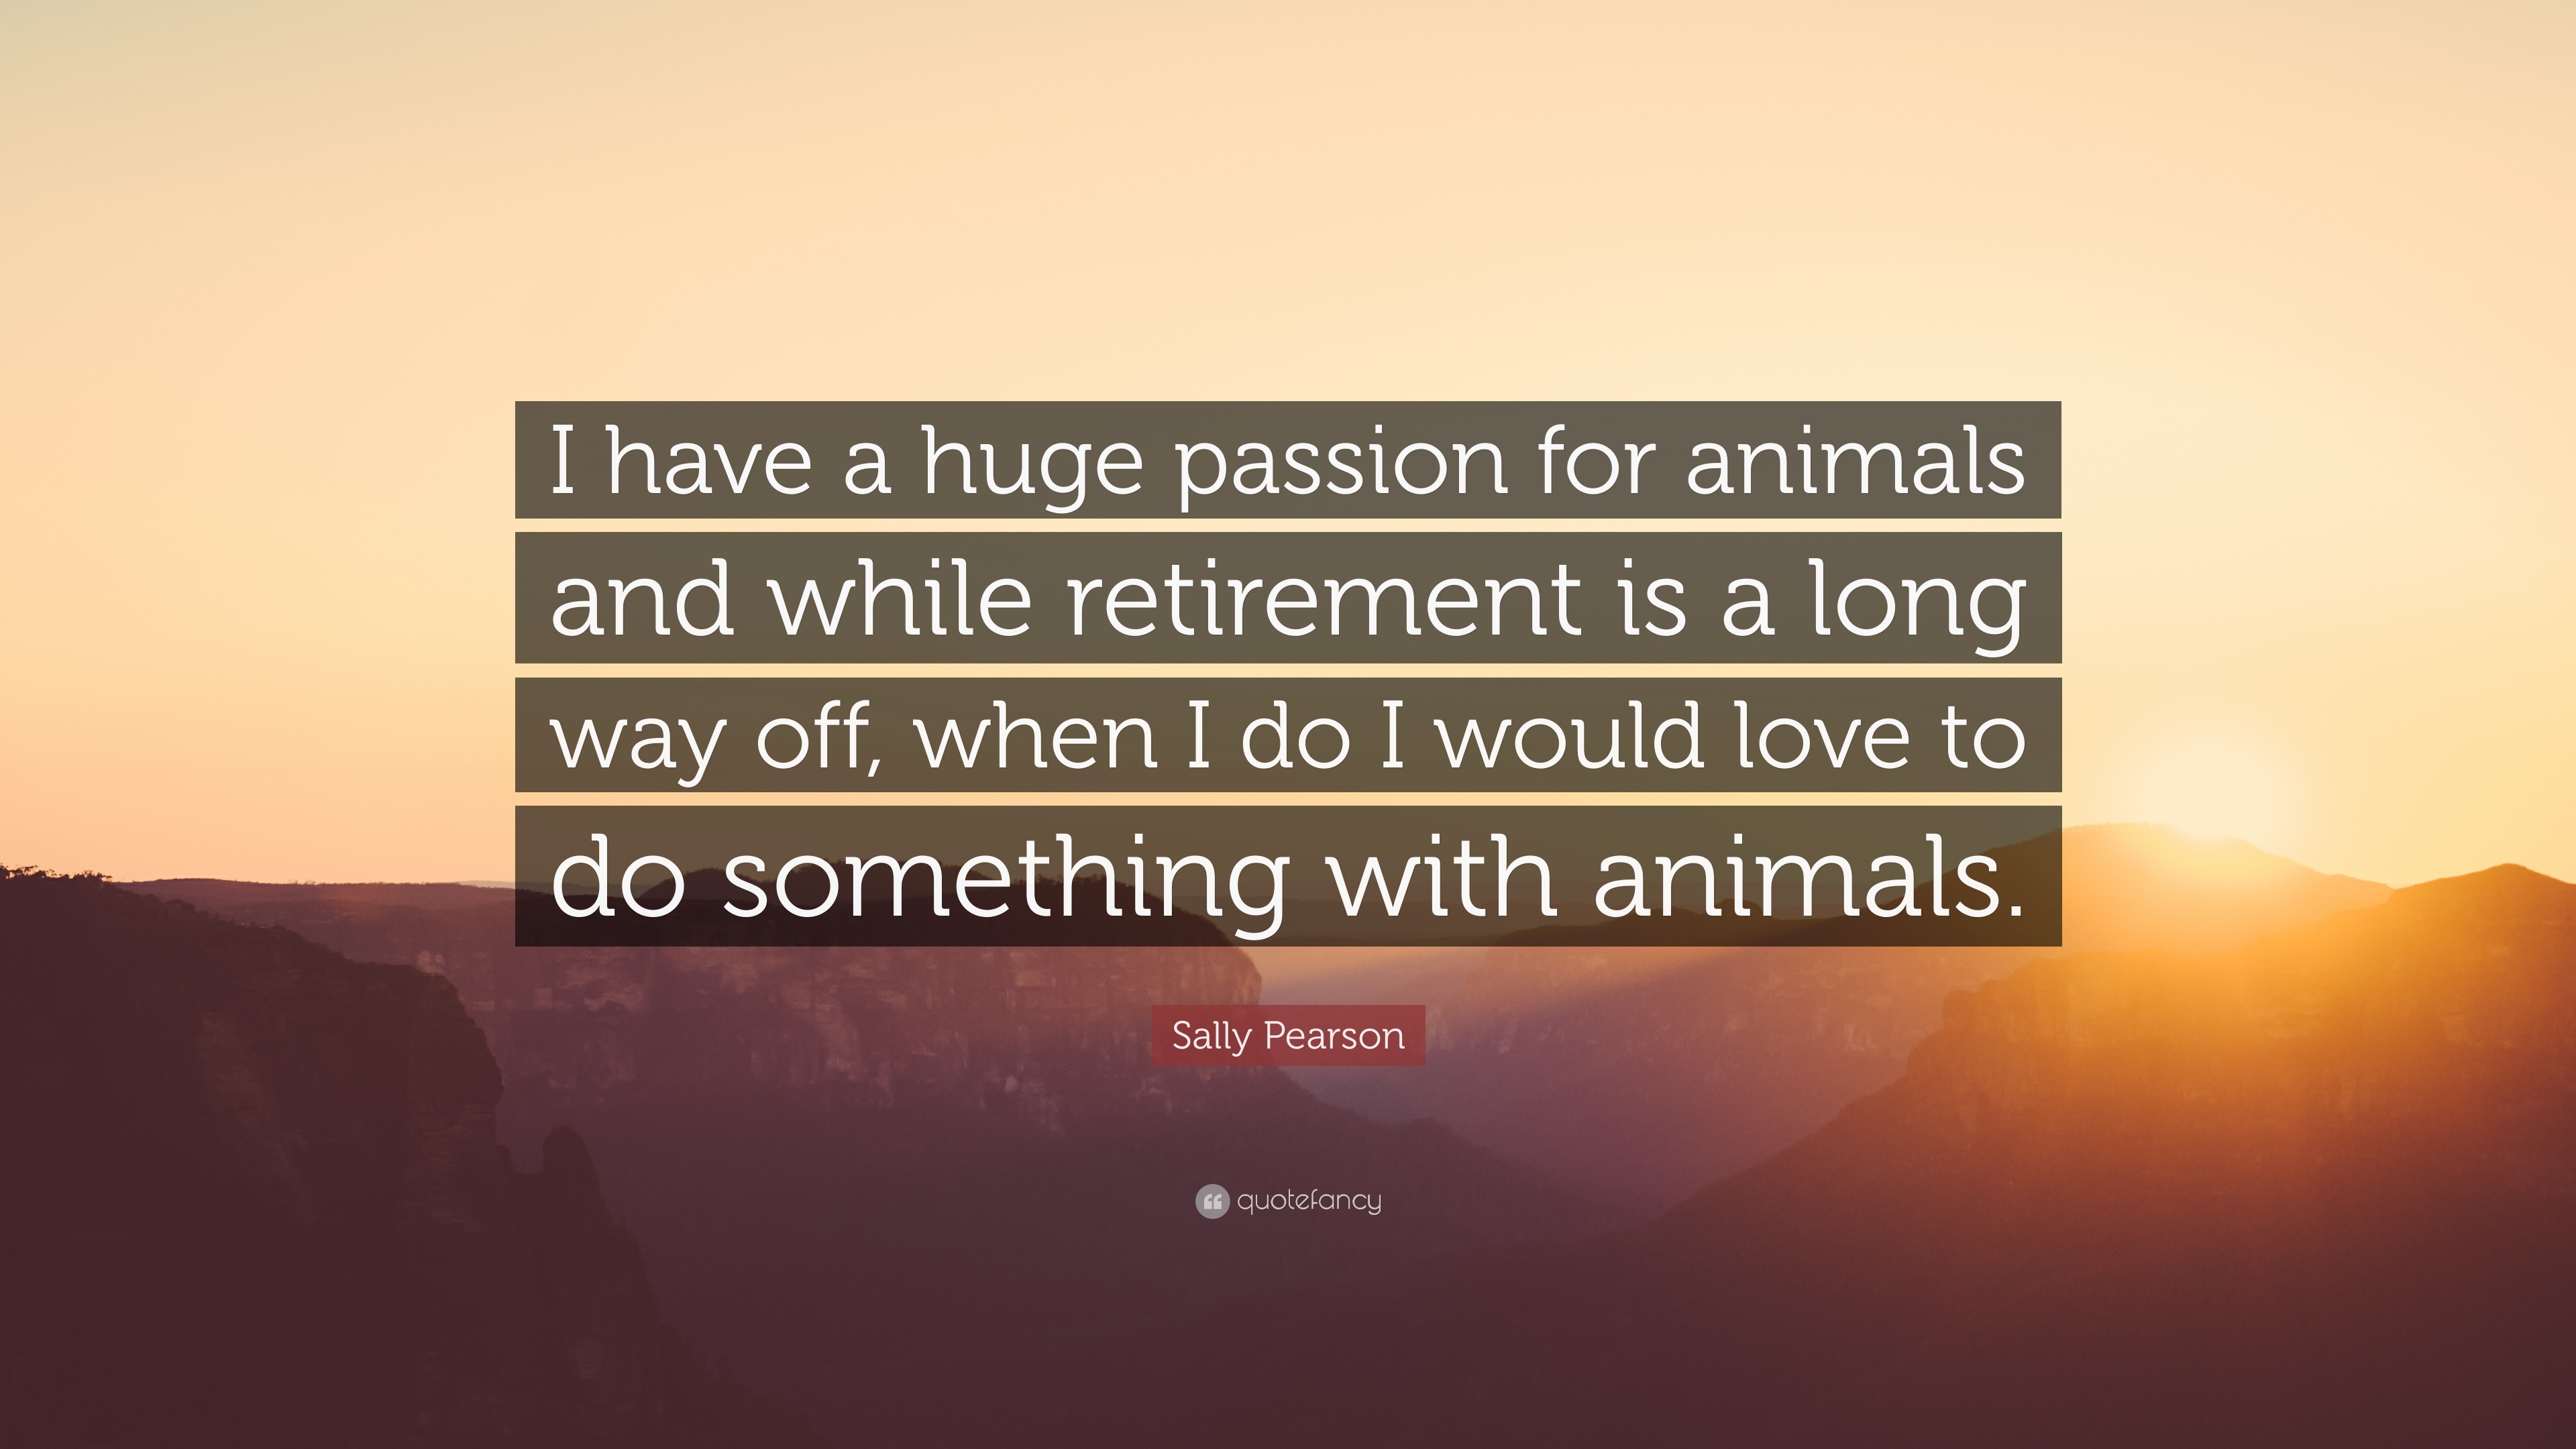 Sally Pearson Quote: “I have a huge passion for animals and while  retirement is a long way off, when I do I would love to do something with  an...”